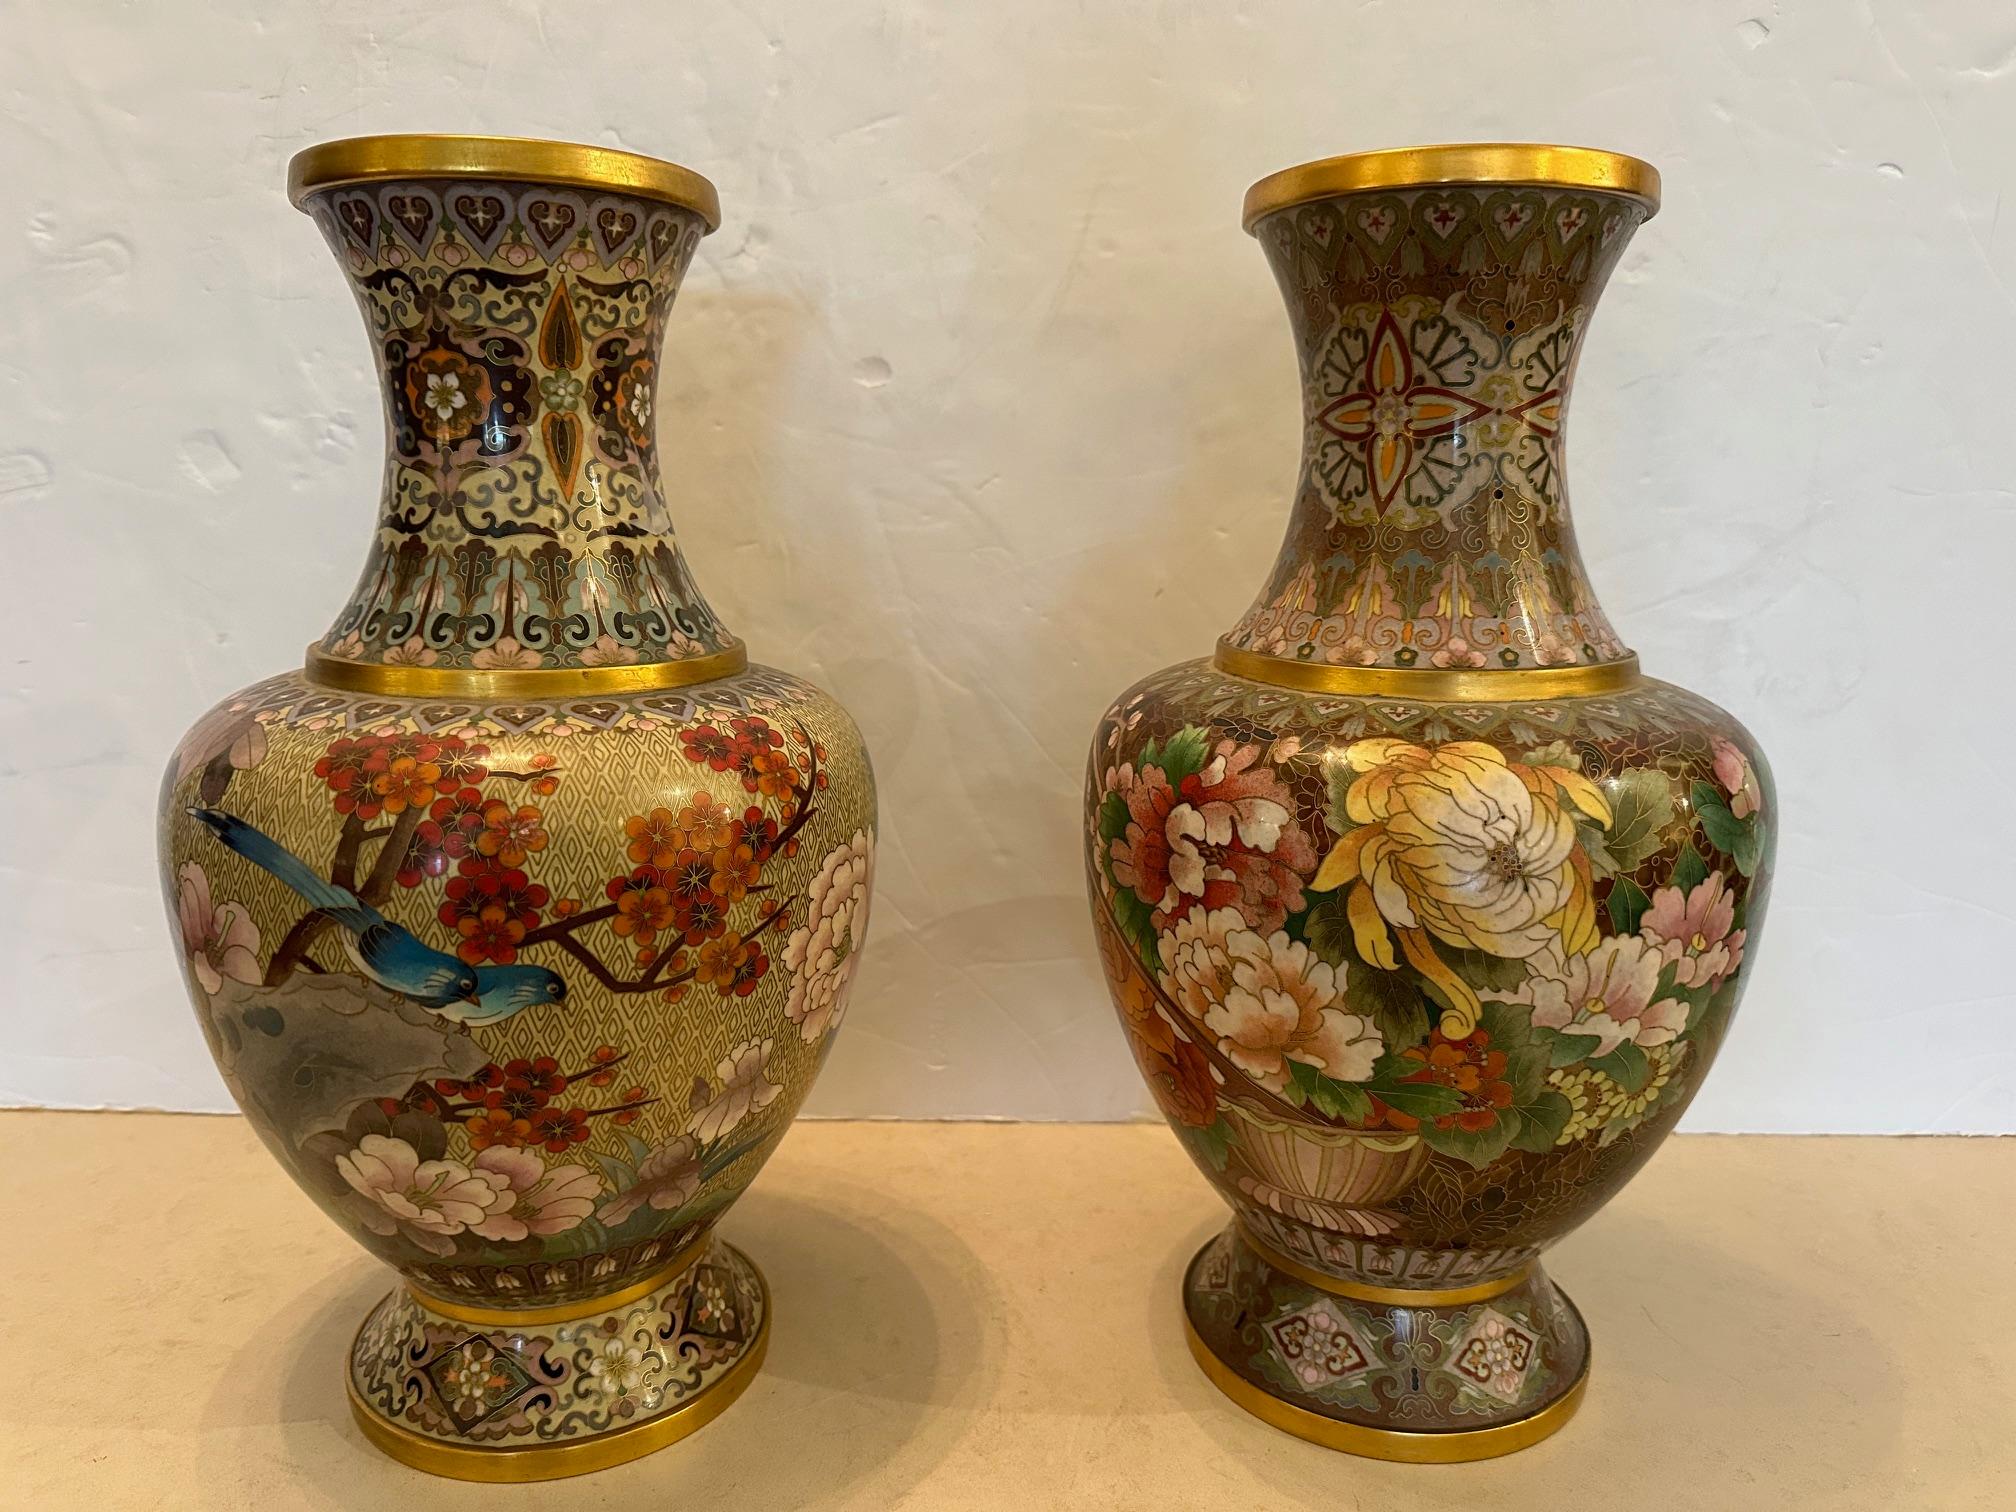 Pair of Exquisite Chinese Gilded Enamel on Bronze Cloissonne Vases